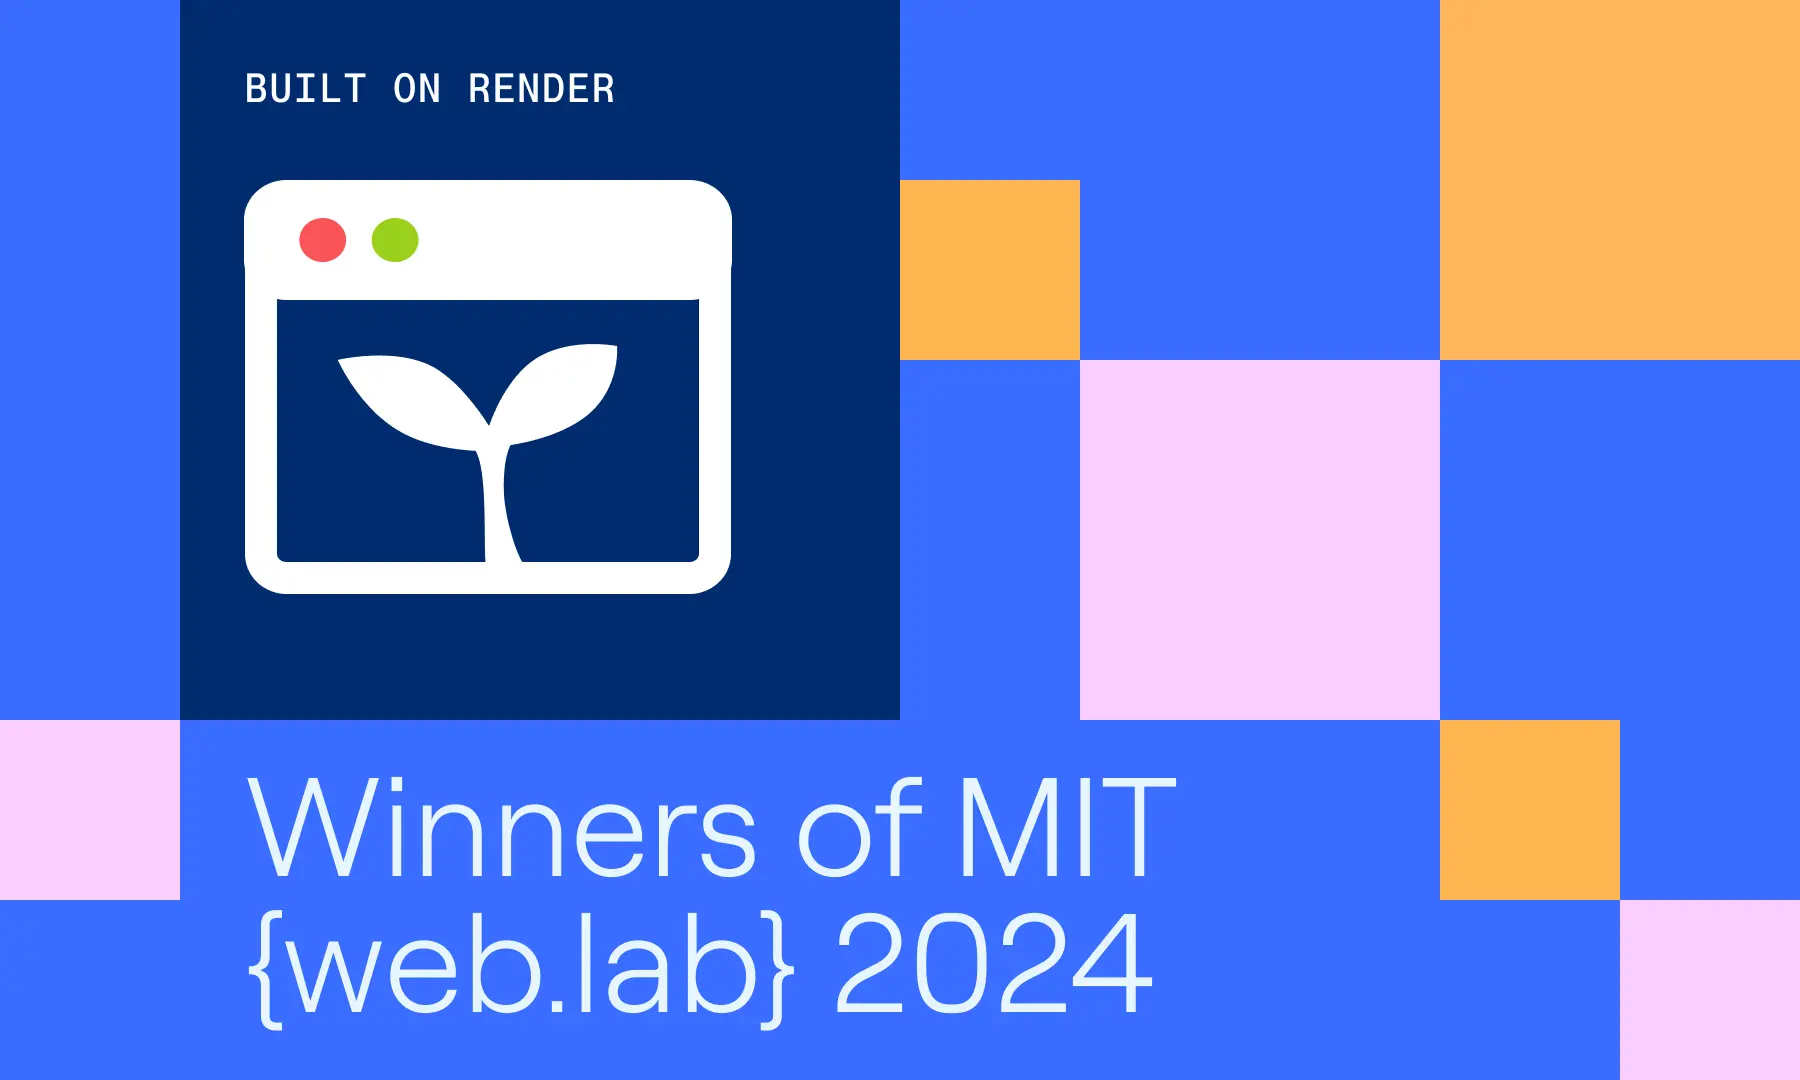 Built on Render: Four Winners from the MIT web.lab Competition